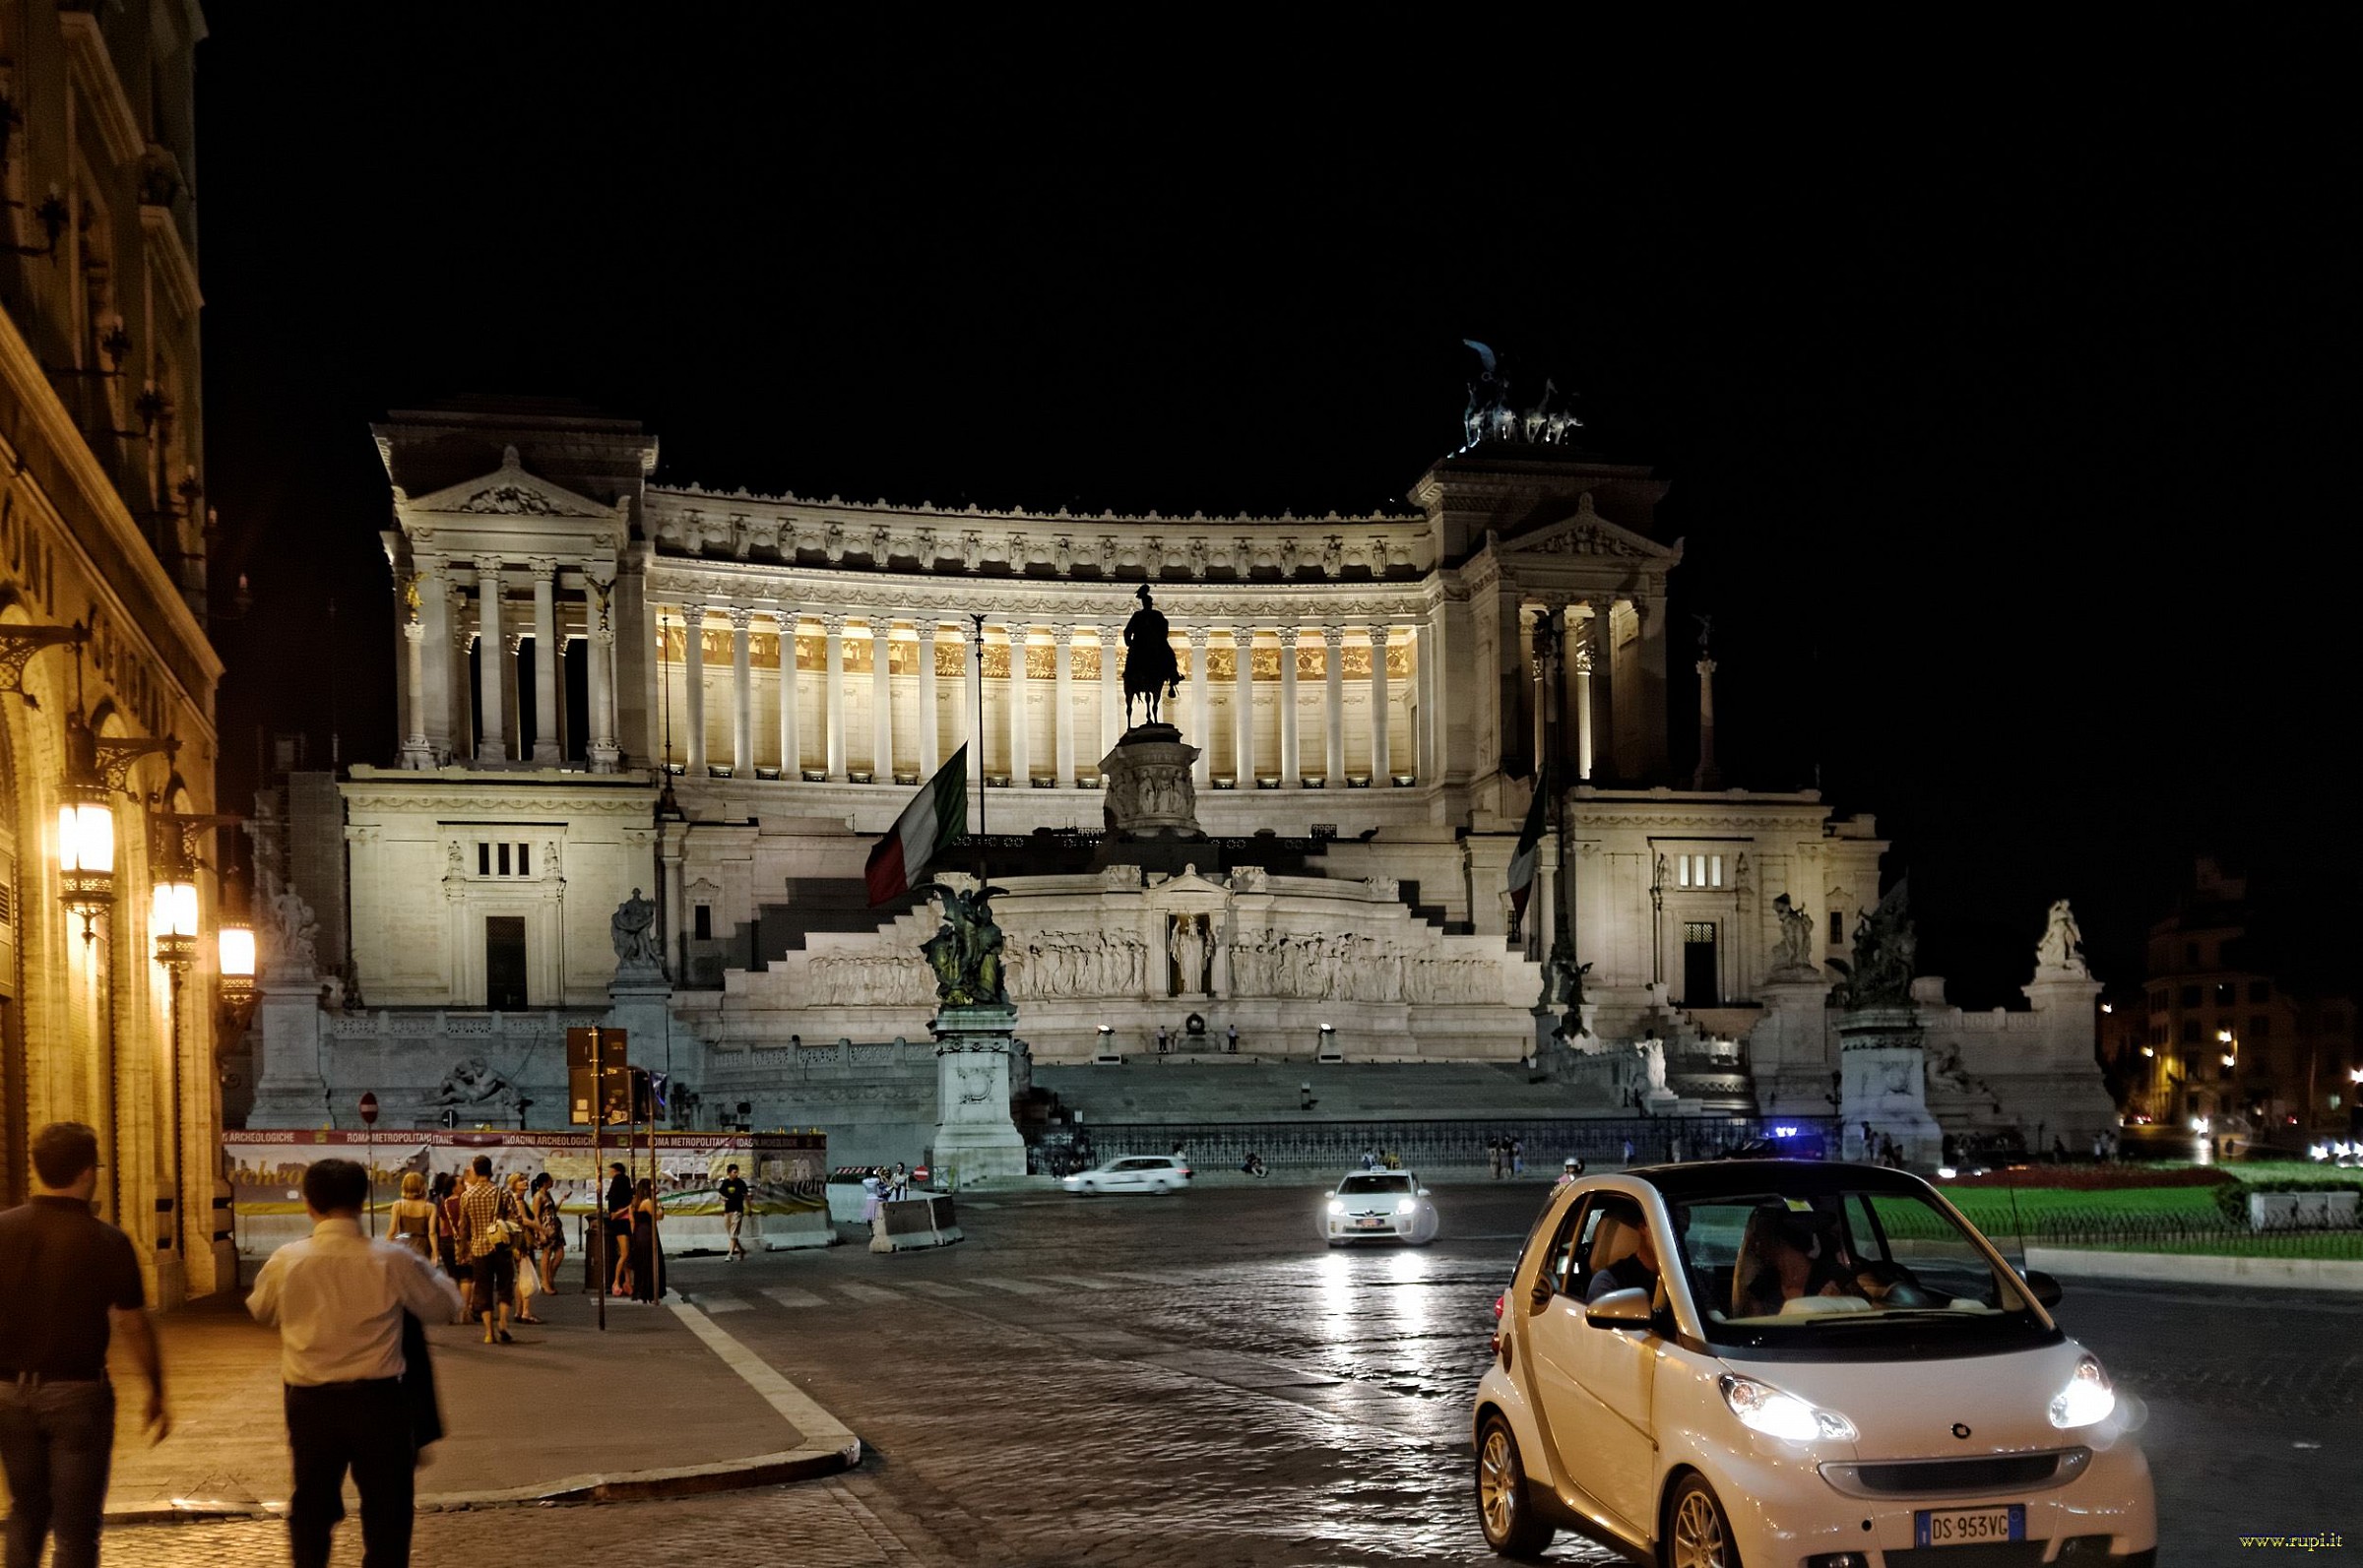 The altar of the fatherland by night...